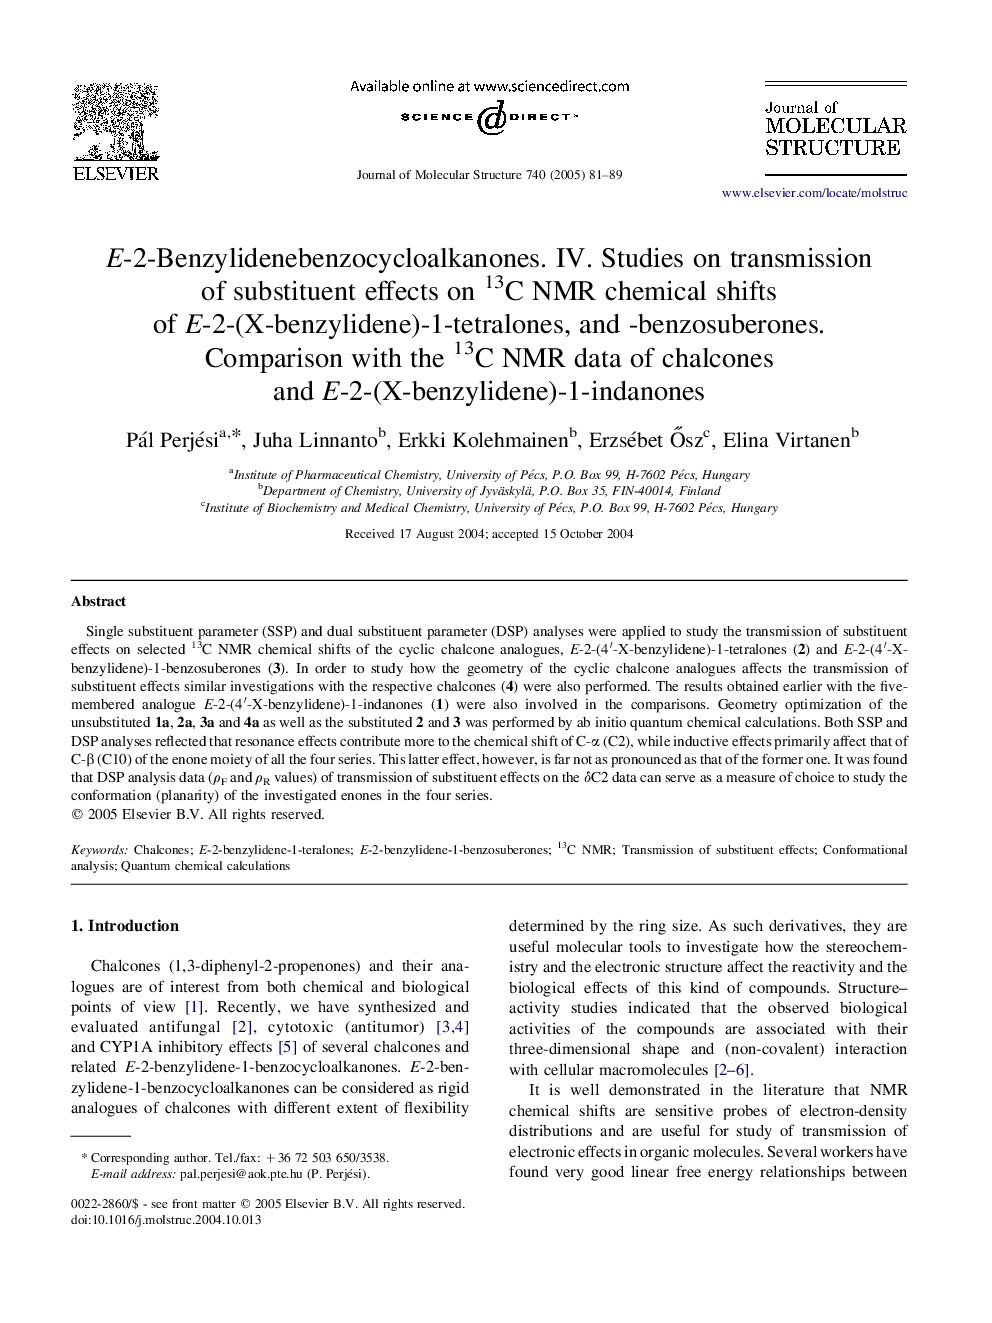 E-2-Benzylidenebenzocycloalkanones. IV. Studies on transmission of substituent effects on 13C NMR chemical shifts of E-2-(X-benzylidene)-1-tetralones, and -benzosuberones. Comparison with the 13C NMR data of chalcones and E-2-(X-benzylidene)-1-indanones